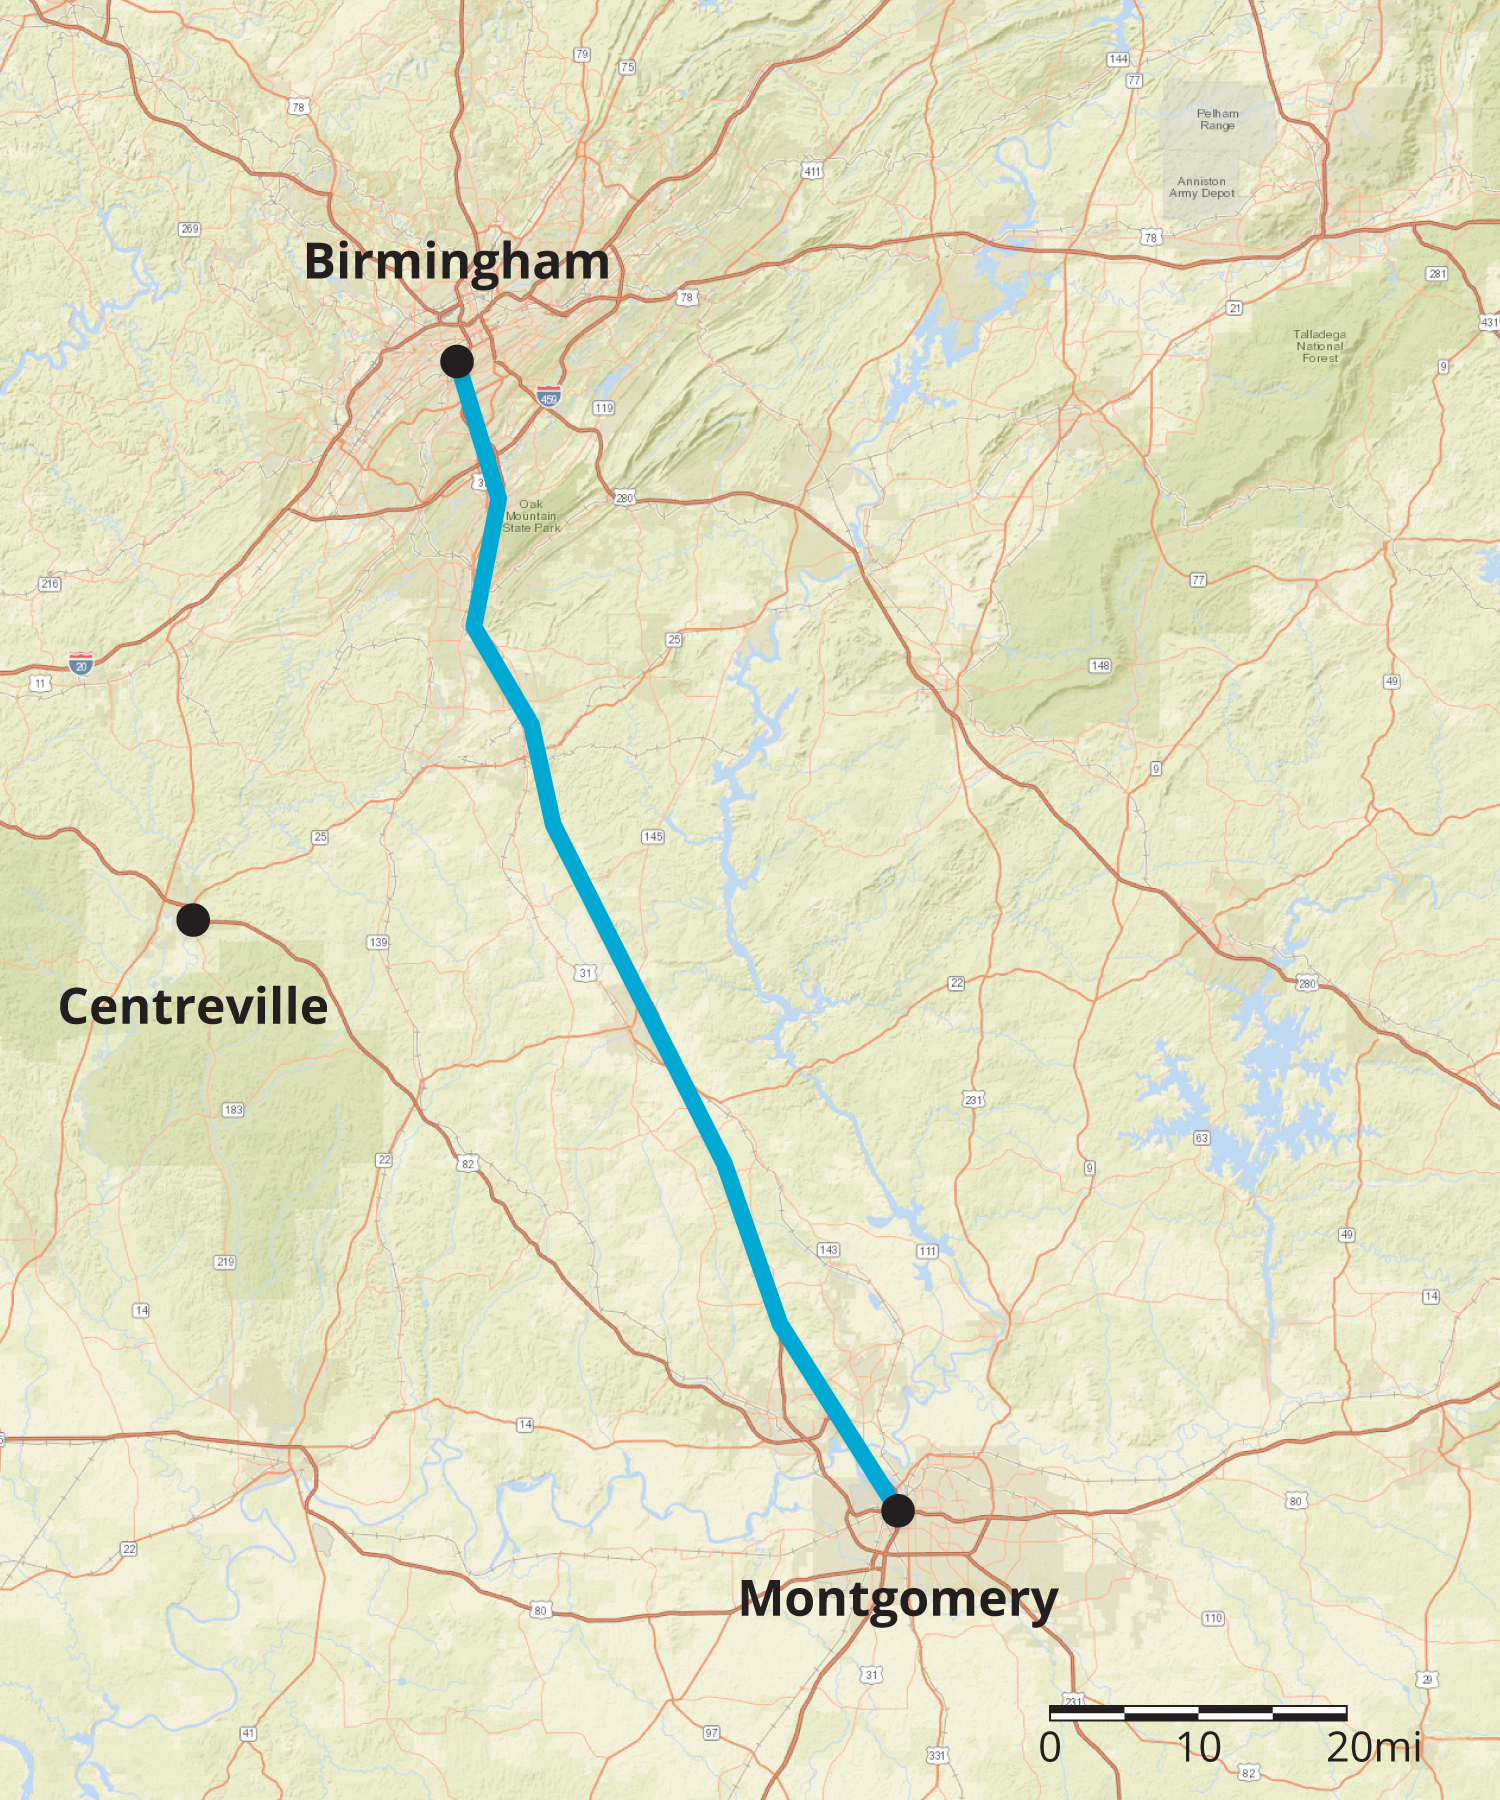 A map of a part of Alabama. Three points indicate three different cities on the map. The bottom point is labeled Montgomery, the middle point is labeled Centreville, and the top point is labeled Birmingham. A scale on the map shows 1 inch equals 20 miles. The distance between Birmingham and Montgomery is approximately 4 point 5 inches on the map.